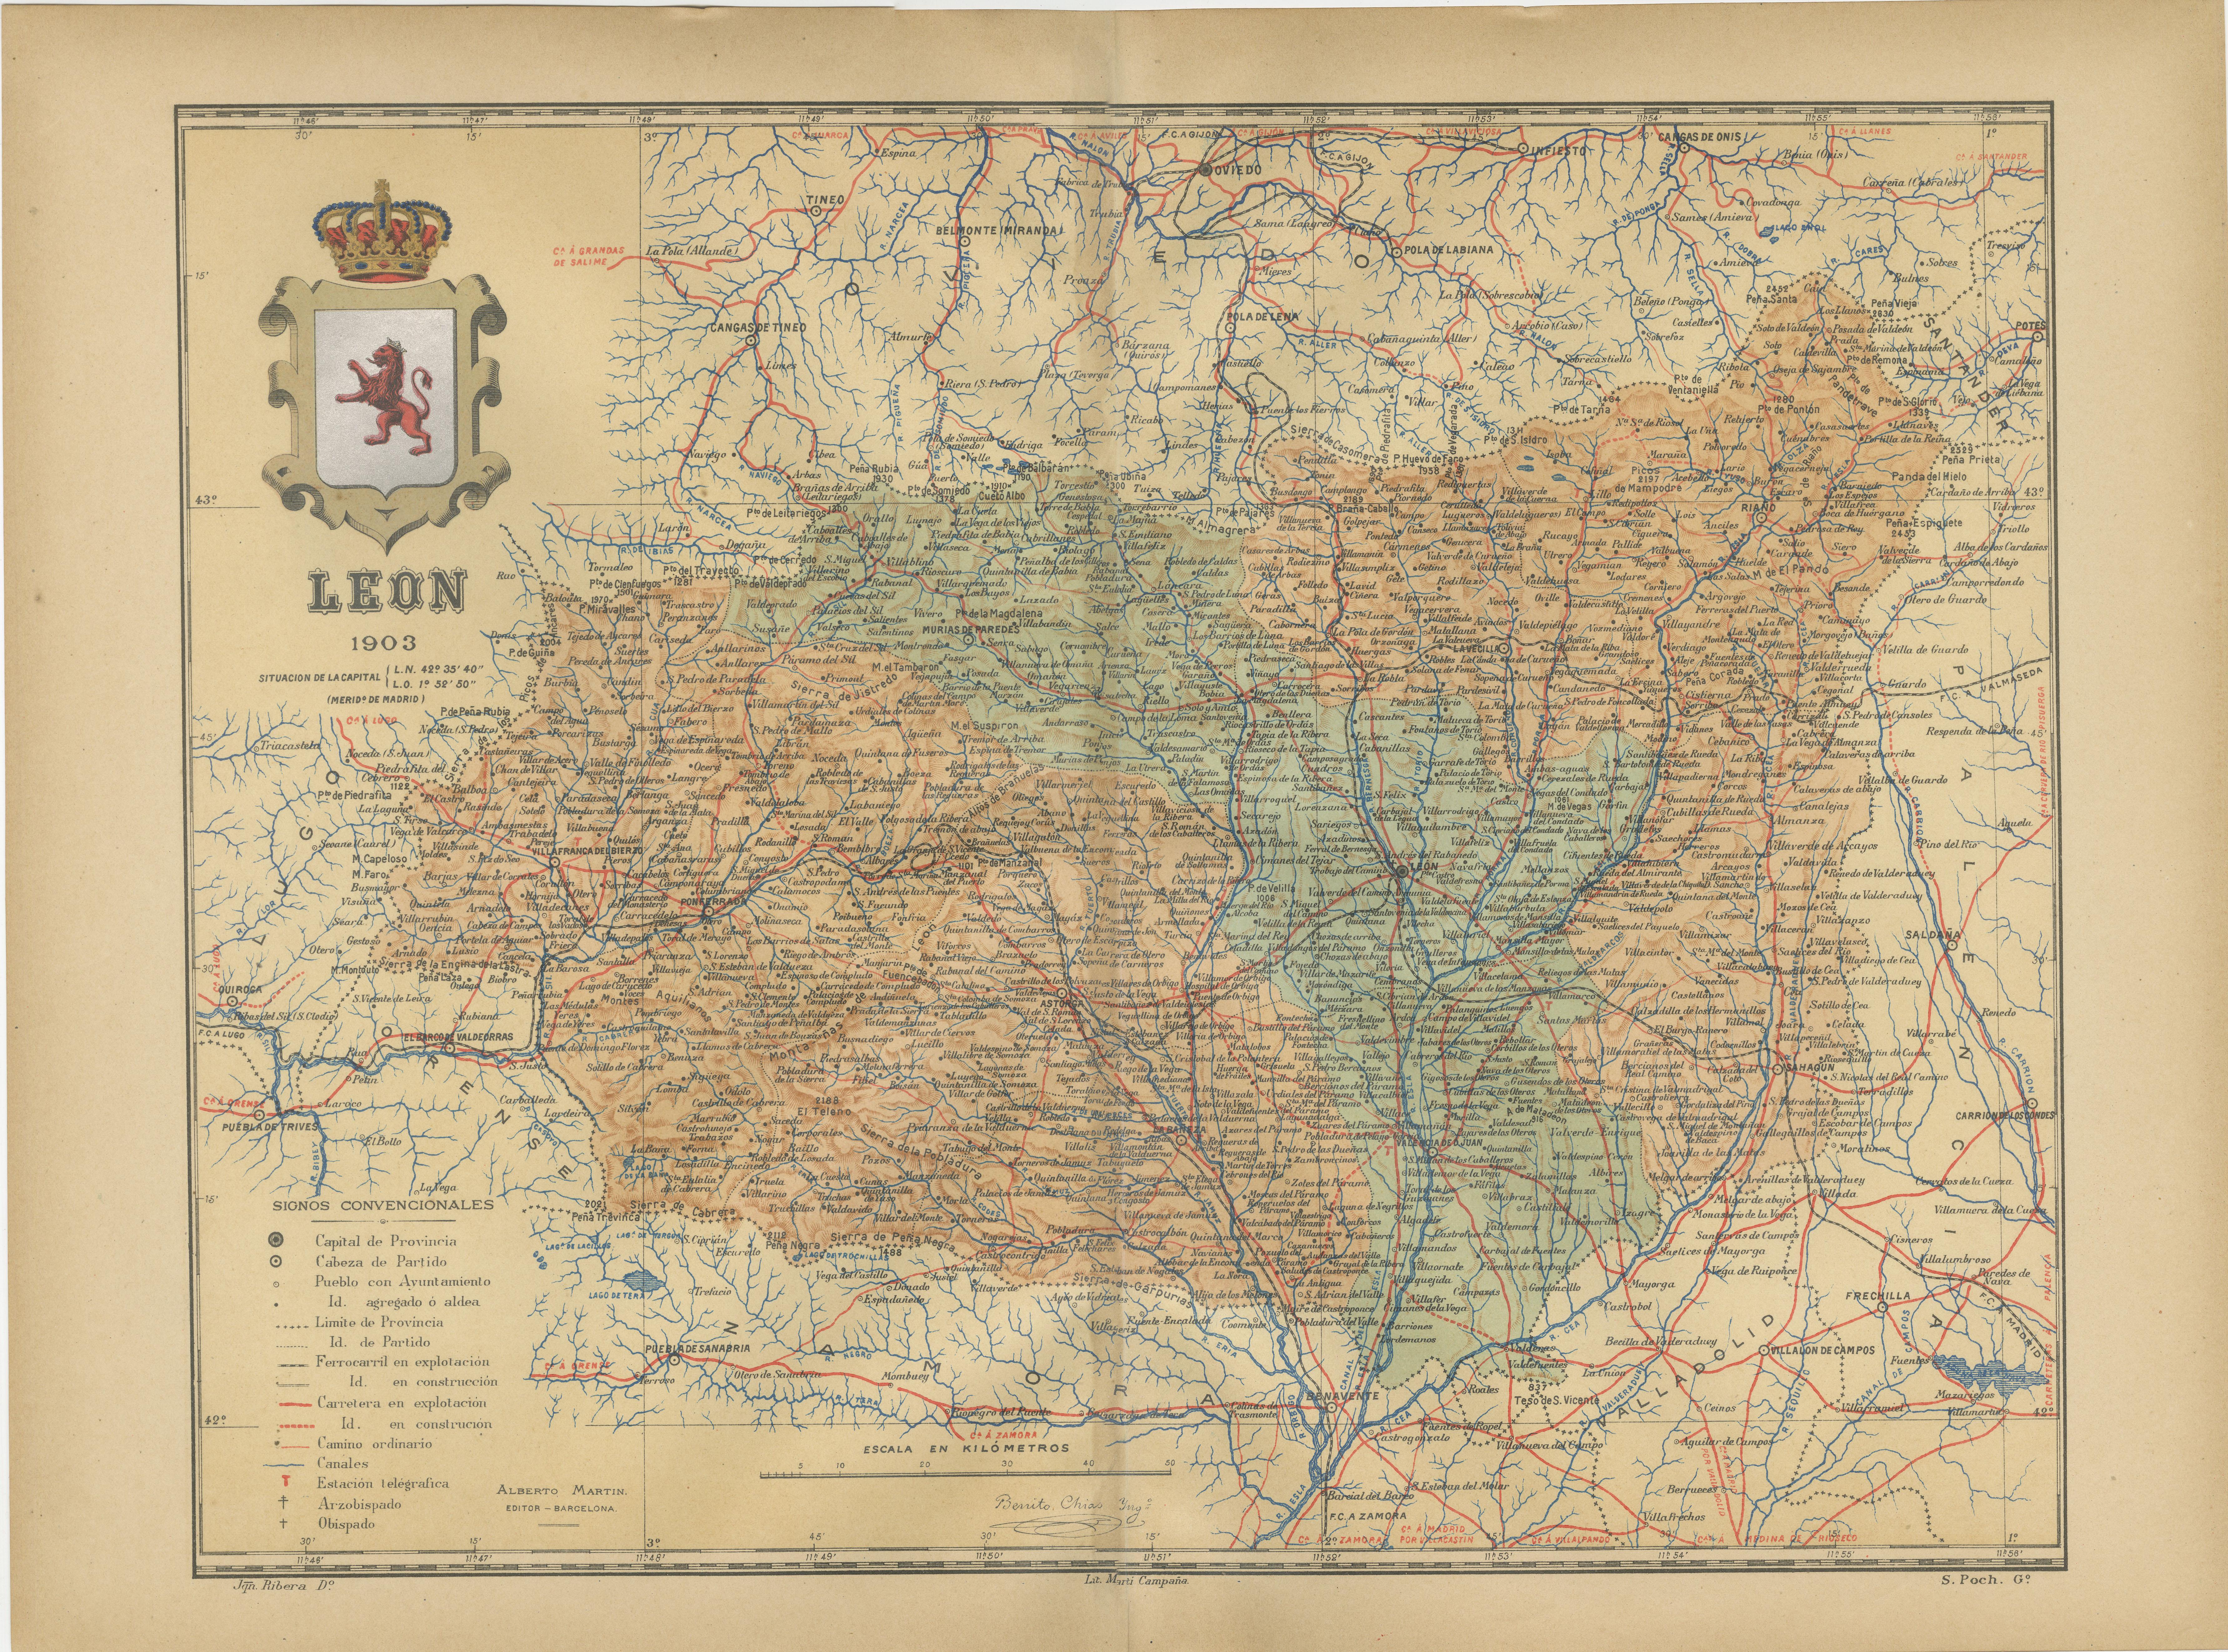 The map depicts the province of León, which is located in the northwest of Spain and forms part of the autonomous community of Castilla y León, as of 1903. Notable features of the map include:

- **Topography**: The province's varied landscape is